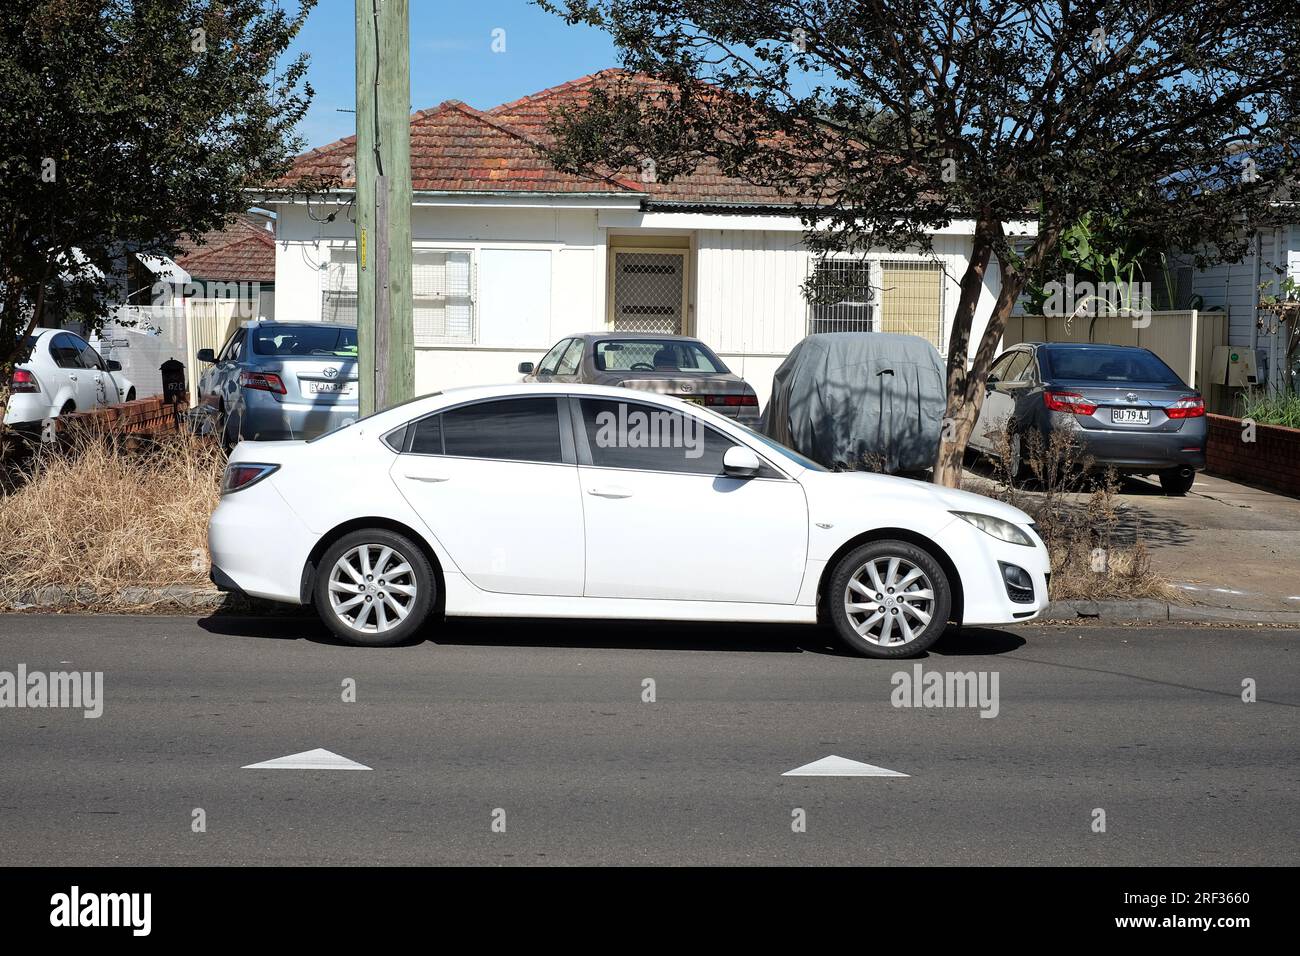 A single-story white Fibro house in suburban Caley Vale with 4 cars parked in the front yard & a white car on the street out front in Western Sydney Stock Photo